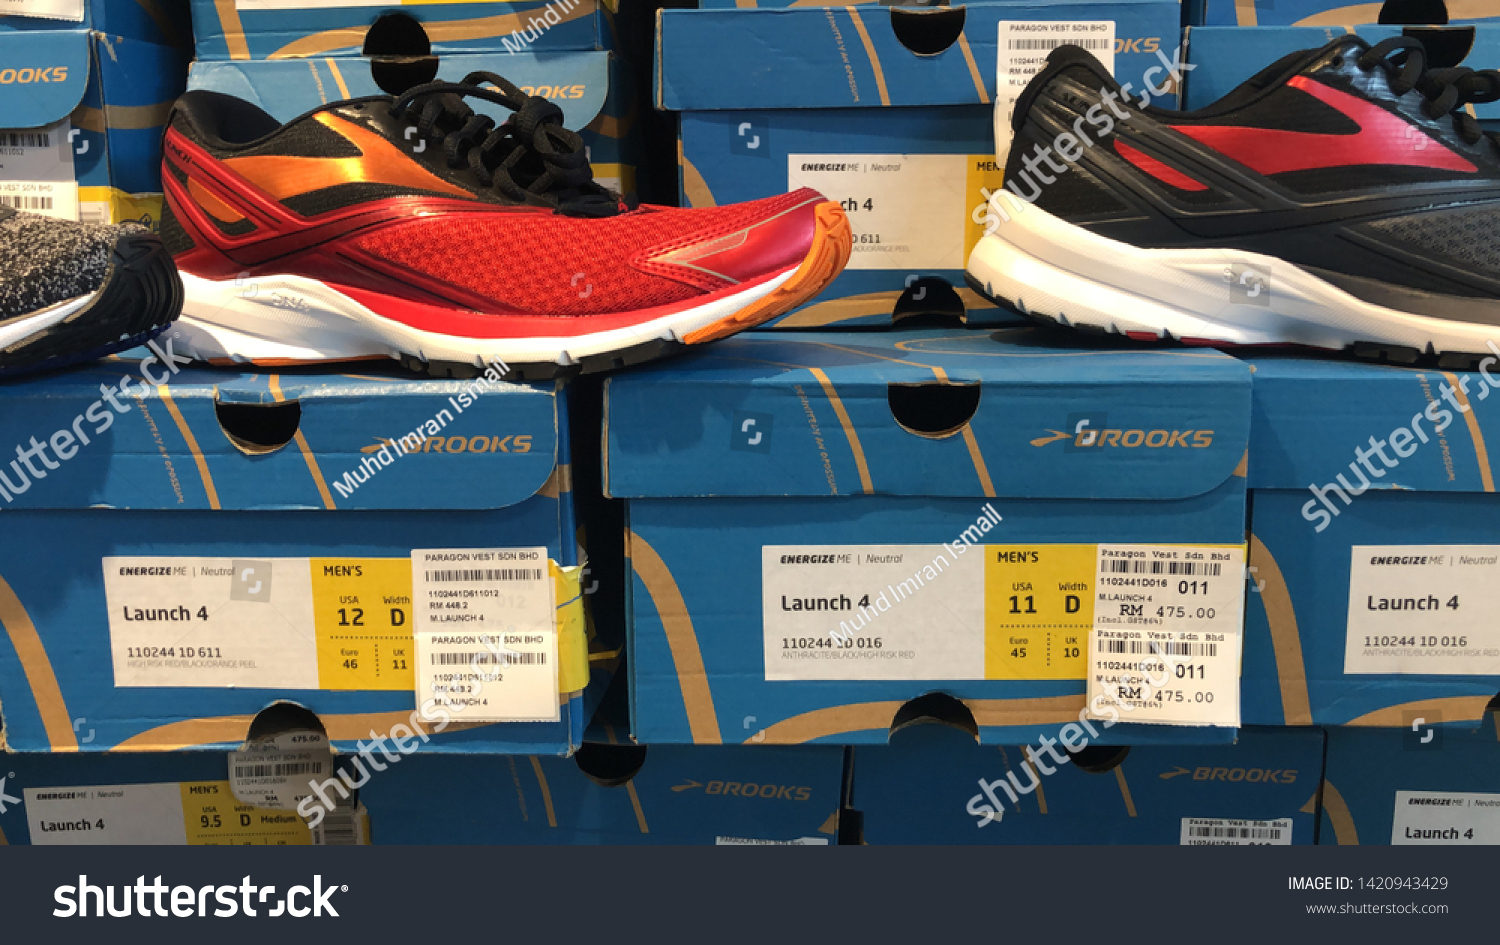 brooks shoes tanger outlet